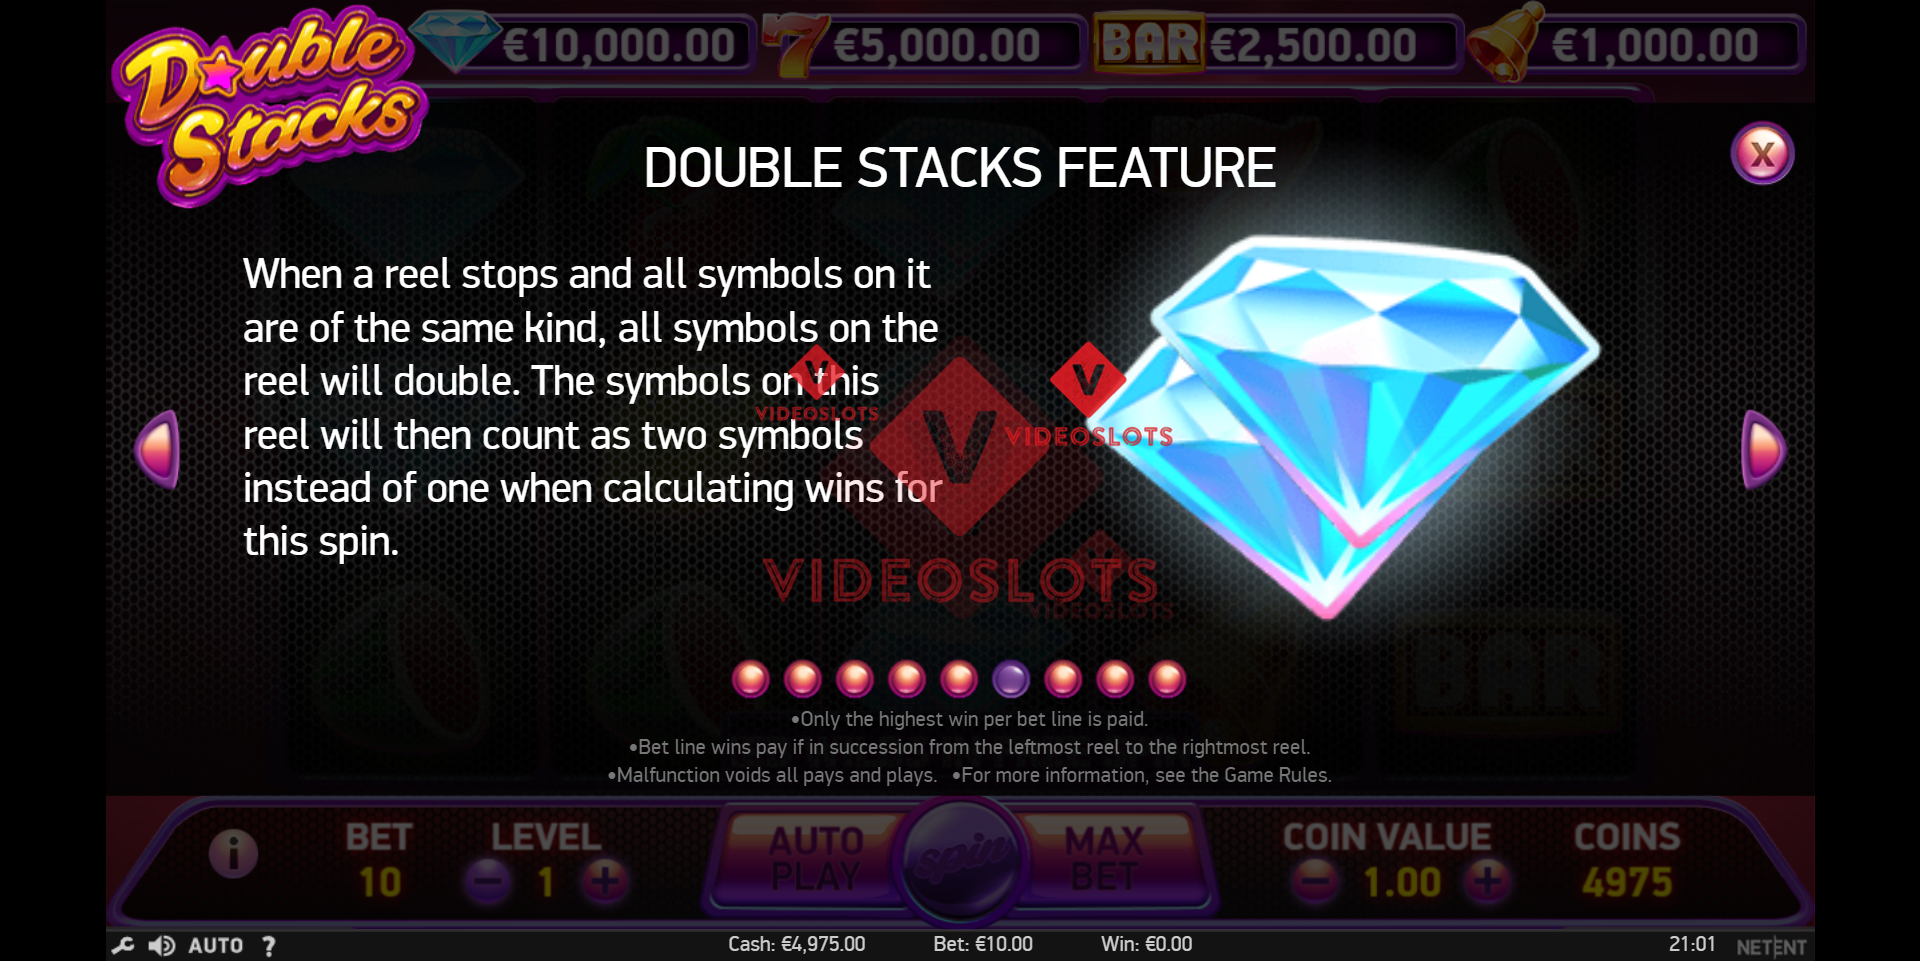 Pay Table for Double Stacks slot from NetEnt